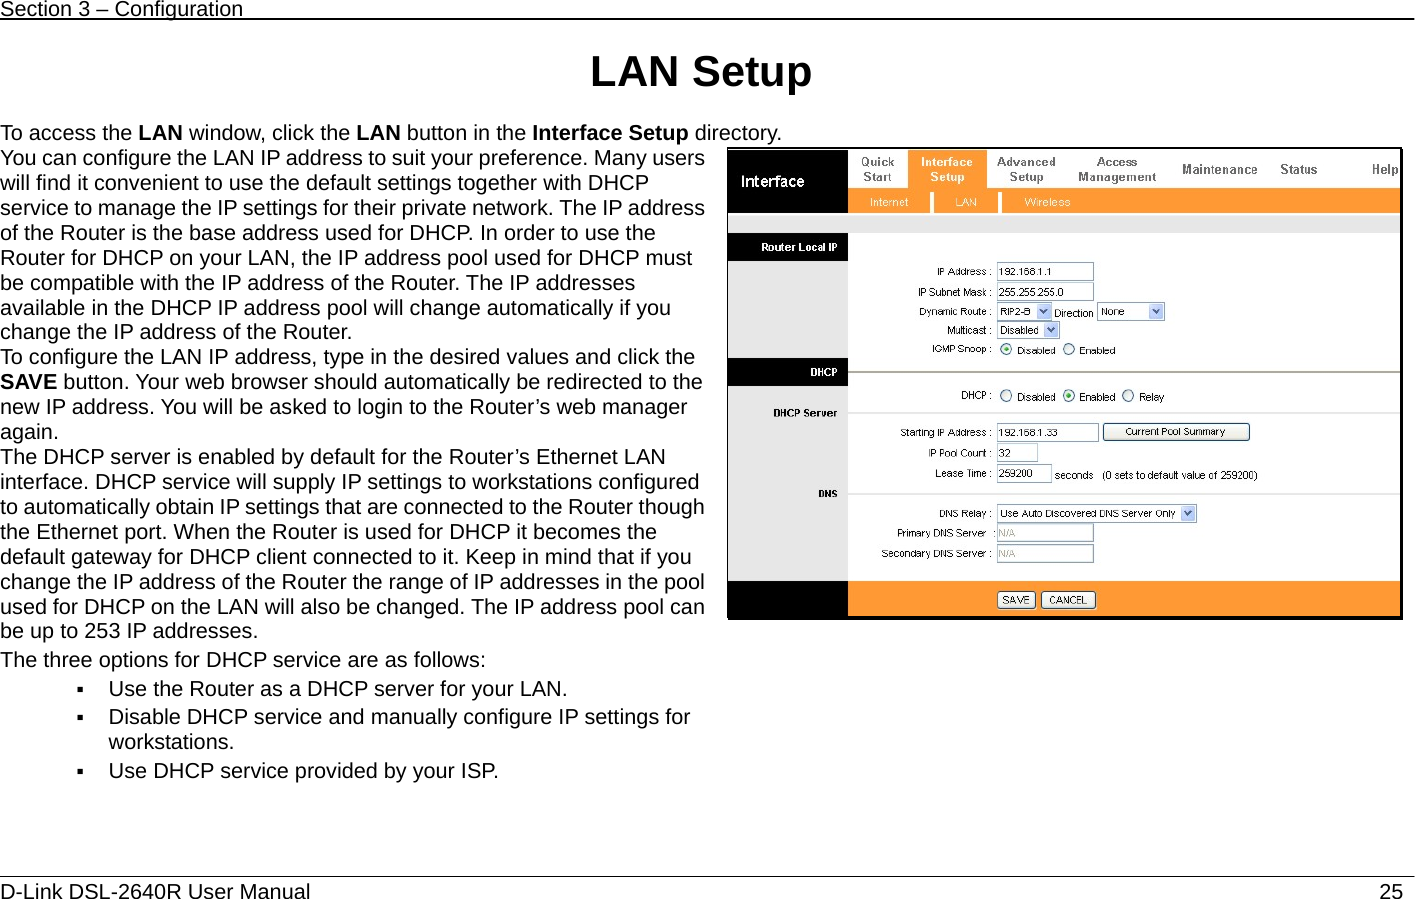 Section 3 – Configuration   D-Link DSL-2640R User Manual                           25LAN Setup  To access the LAN window, click the LAN button in the Interface Setup directory. You can configure the LAN IP address to suit your preference. Many users will find it convenient to use the default settings together with DHCP service to manage the IP settings for their private network. The IP address of the Router is the base address used for DHCP. In order to use the Router for DHCP on your LAN, the IP address pool used for DHCP must be compatible with the IP address of the Router. The IP addresses available in the DHCP IP address pool will change automatically if you change the IP address of the Router.   To configure the LAN IP address, type in the desired values and click the SAVE button. Your web browser should automatically be redirected to the new IP address. You will be asked to login to the Router’s web manager again. The DHCP server is enabled by default for the Router’s Ethernet LAN interface. DHCP service will supply IP settings to workstations configured to automatically obtain IP settings that are connected to the Router though the Ethernet port. When the Router is used for DHCP it becomes the default gateway for DHCP client connected to it. Keep in mind that if you change the IP address of the Router the range of IP addresses in the pool used for DHCP on the LAN will also be changed. The IP address pool can be up to 253 IP addresses. The three options for DHCP service are as follows:    Use the Router as a DHCP server for your LAN.    Disable DHCP service and manually configure IP settings for workstations.  Use DHCP service provided by your ISP.   